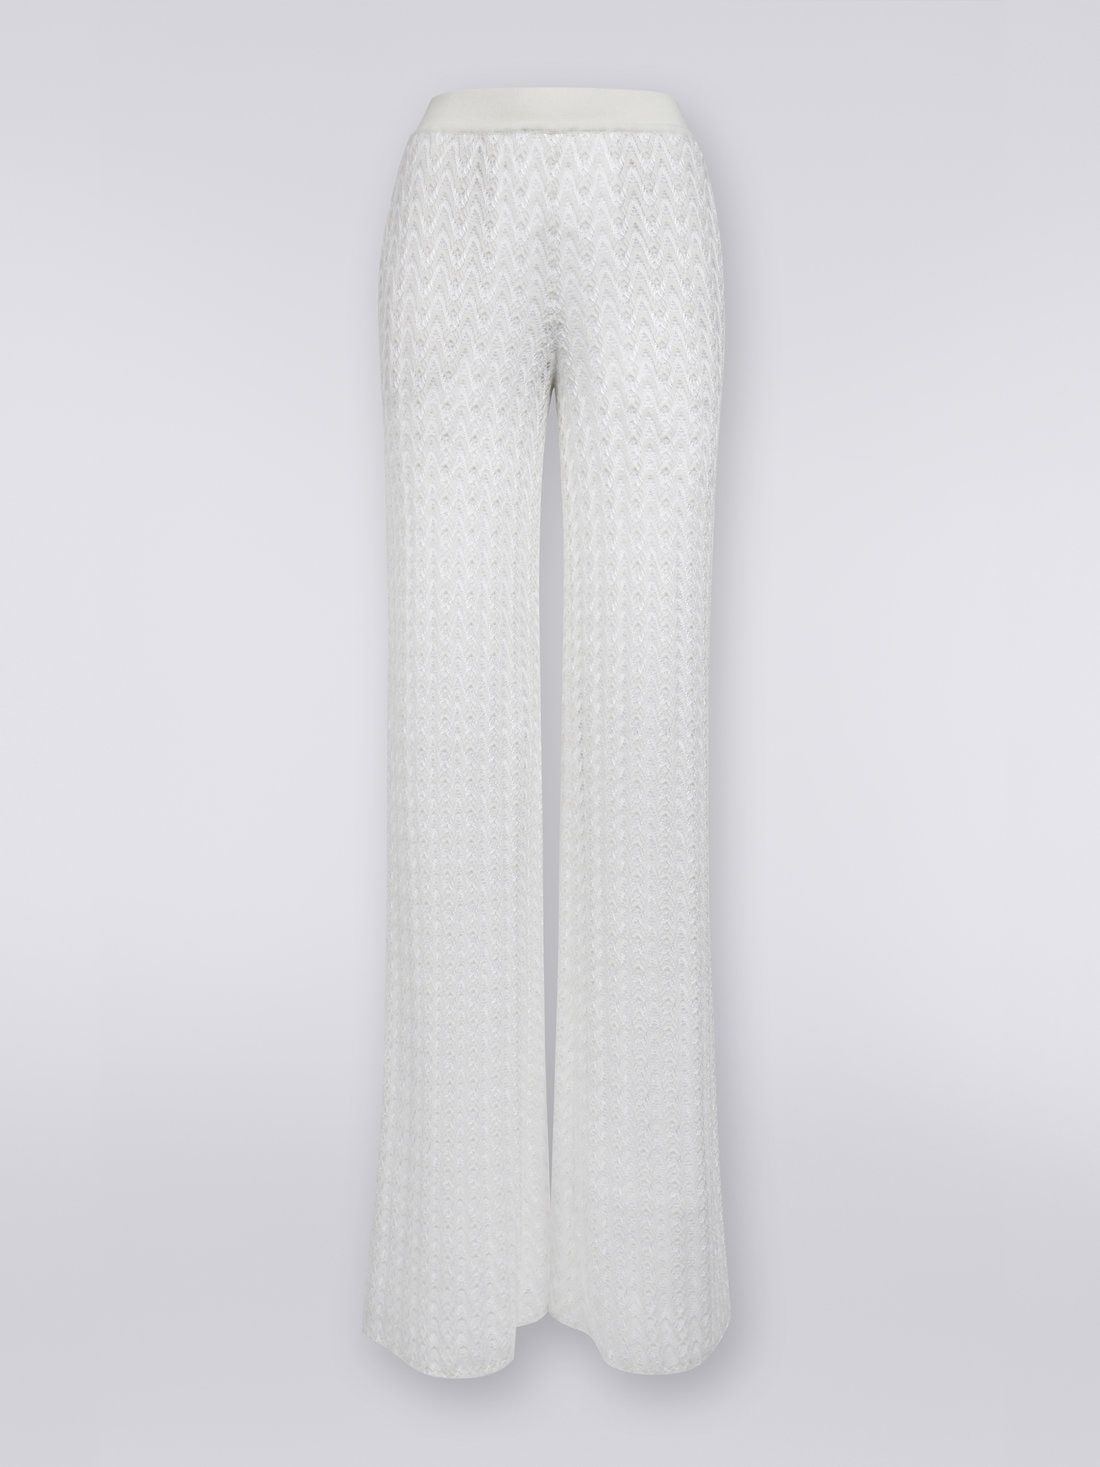 Palazzo pants in raschel knit wool and viscose, White  - DS23WI0WBR00NU14001 - 0